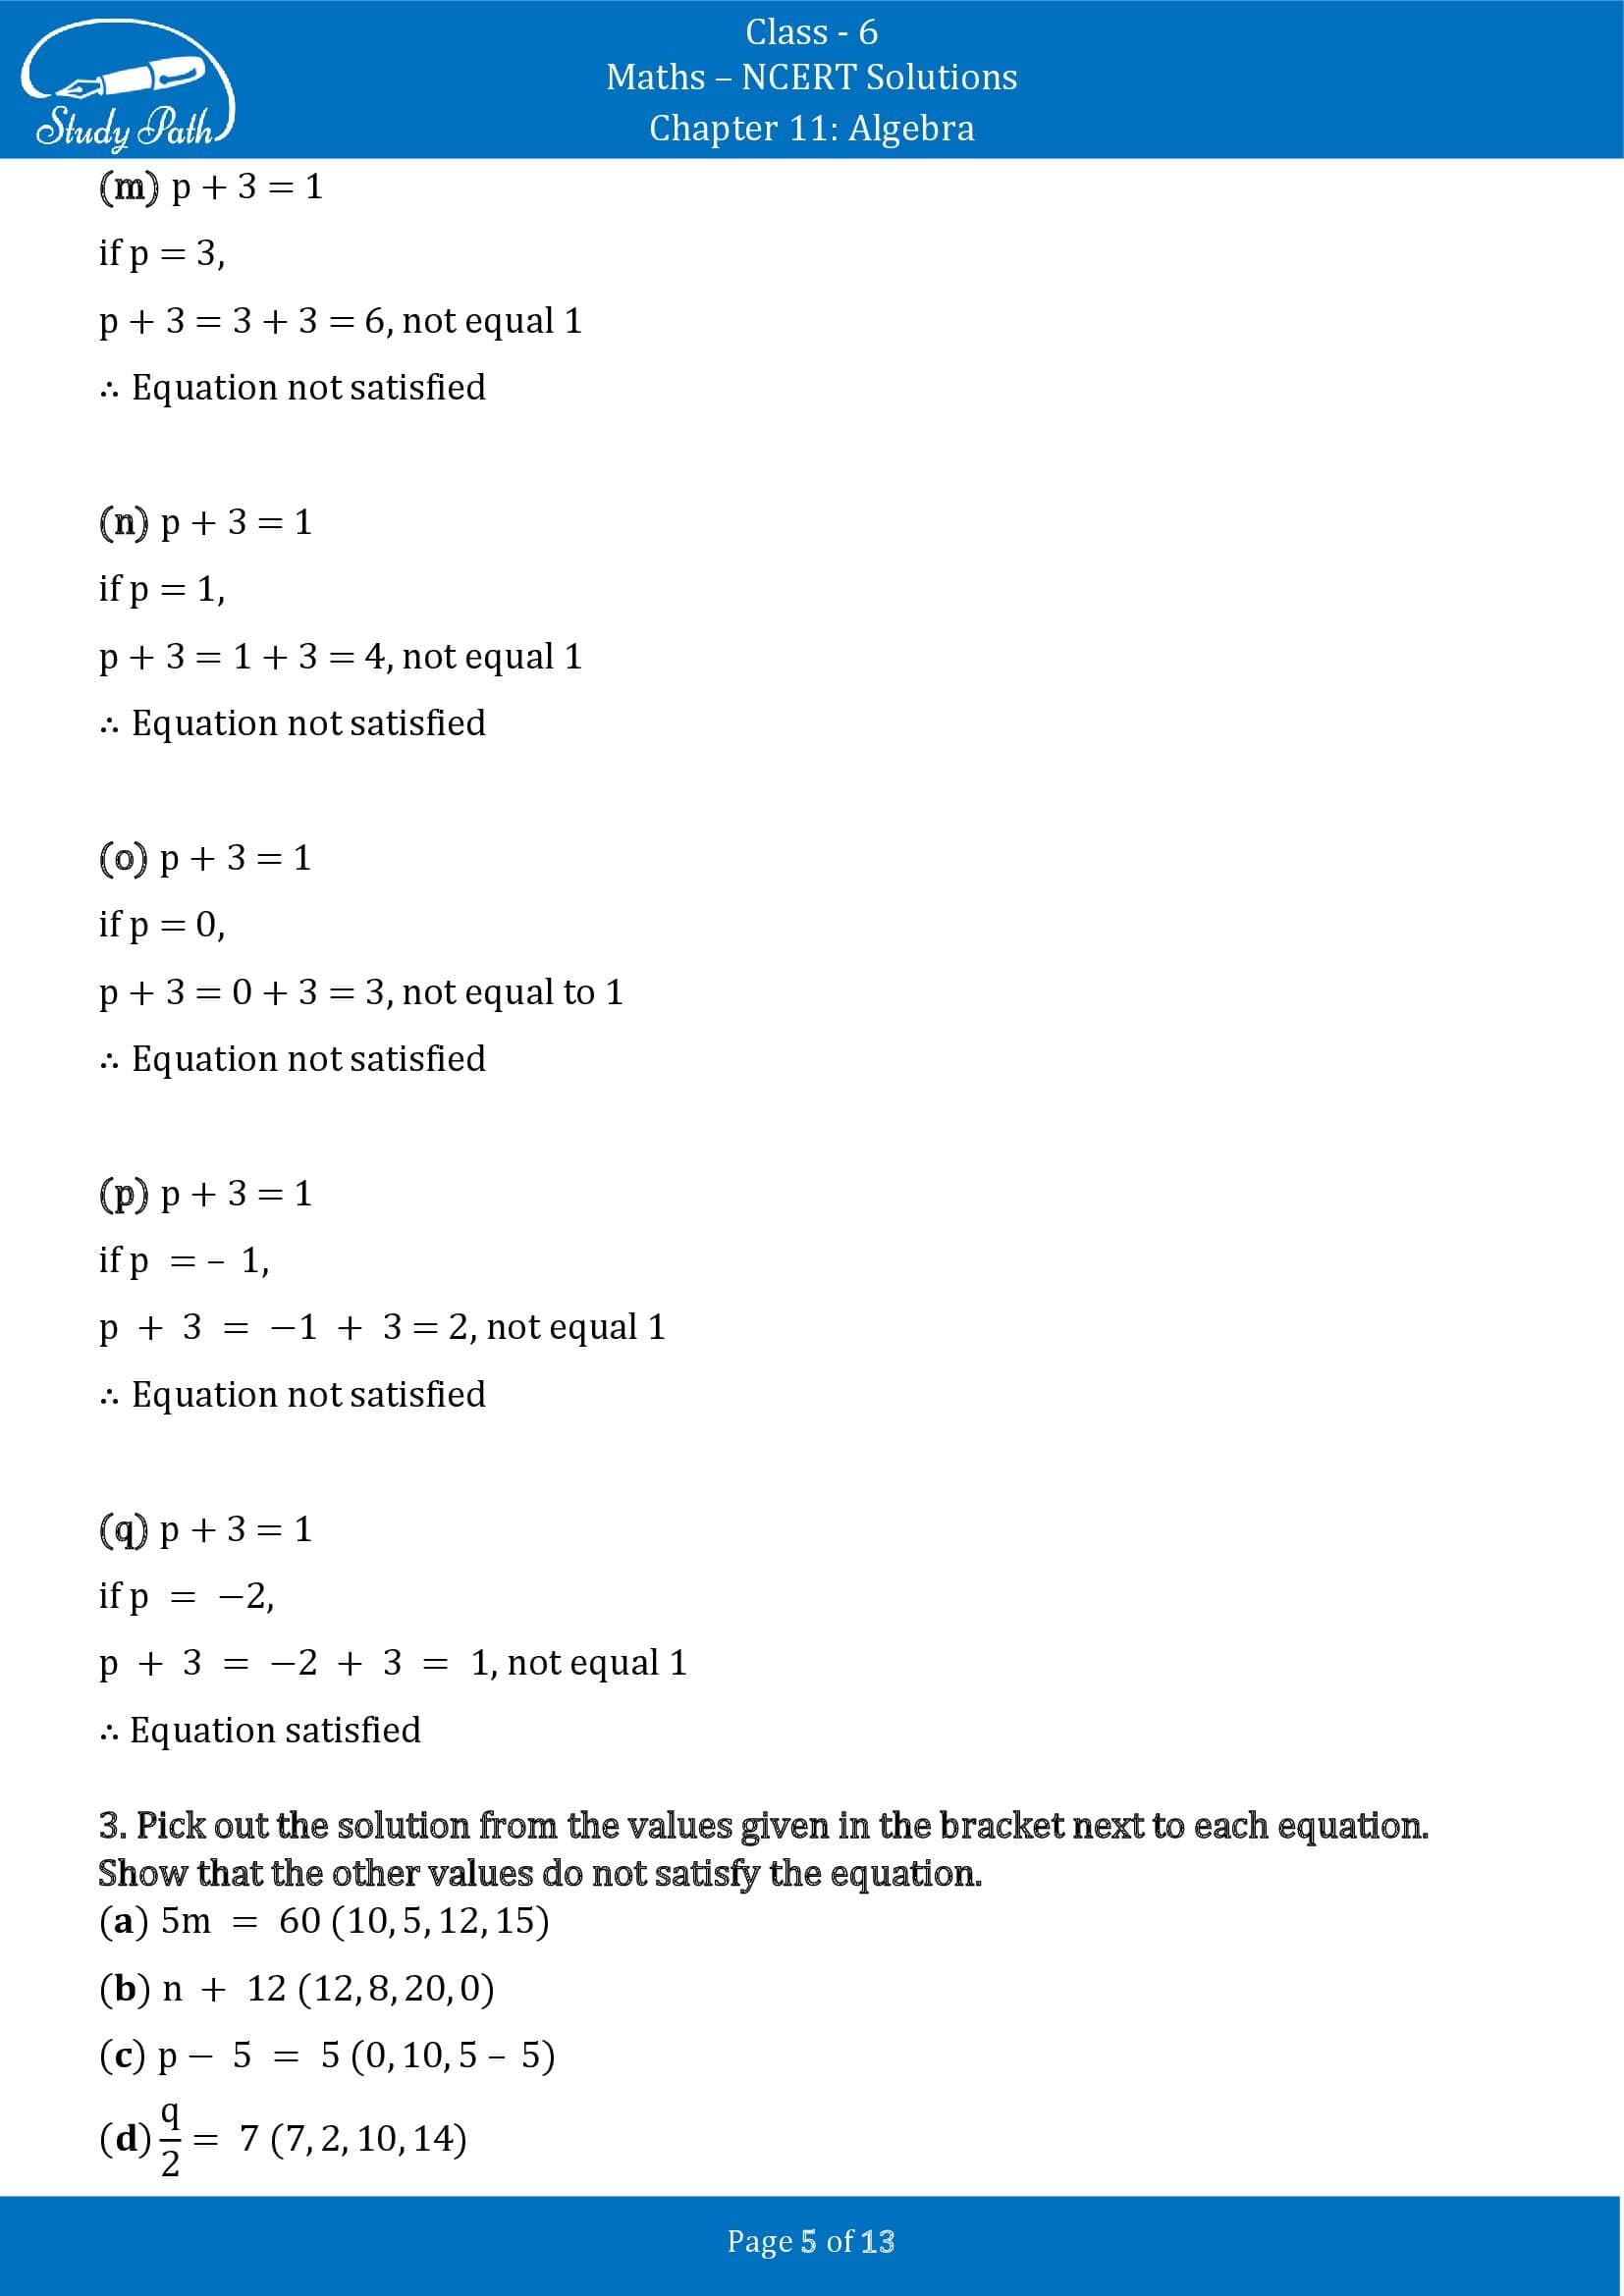 NCERT Solutions for Class 6 Maths Chapter 11 Algebra Exercise 11.5 00005